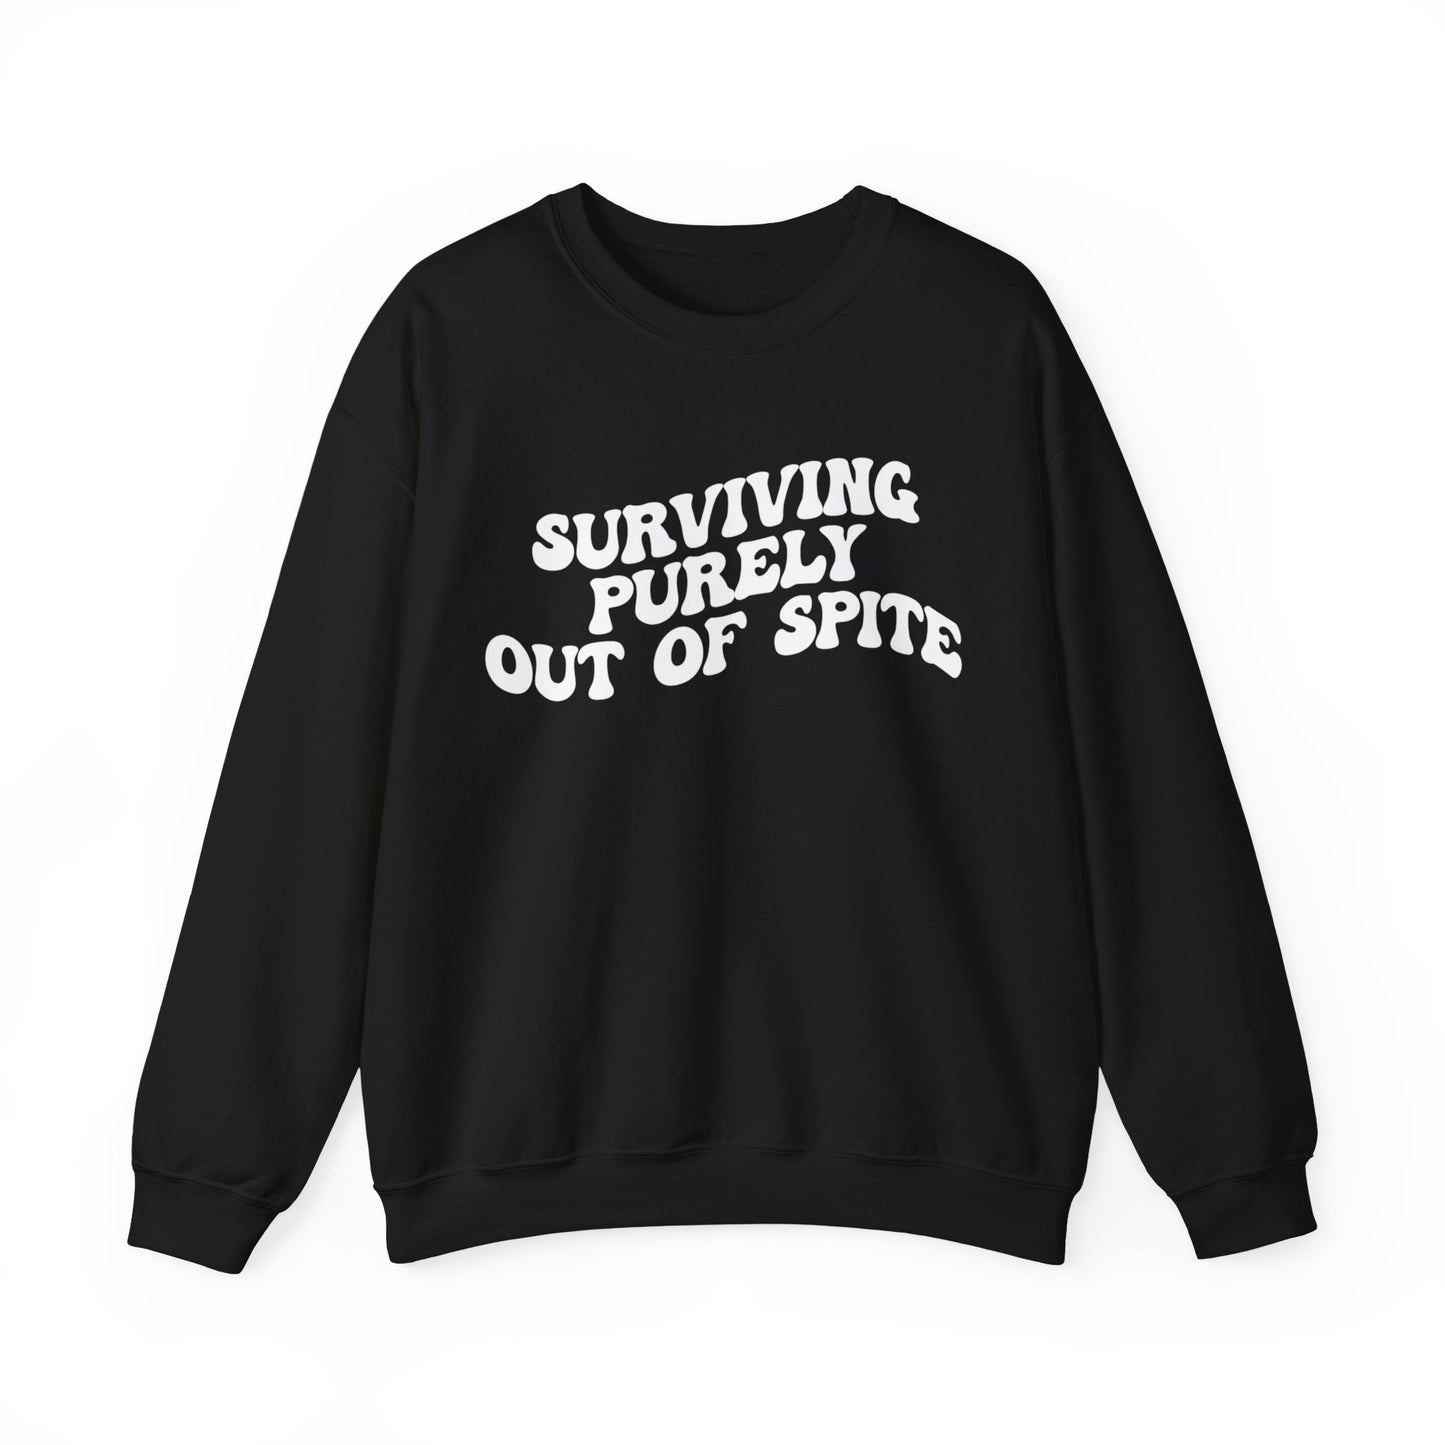 Surviving Purely Out of Spite Sweatshirt, Mental Health, Cancer Survivor, Survivor Sweatshirt, Strong Empowered Women, Iron Lady, S1408